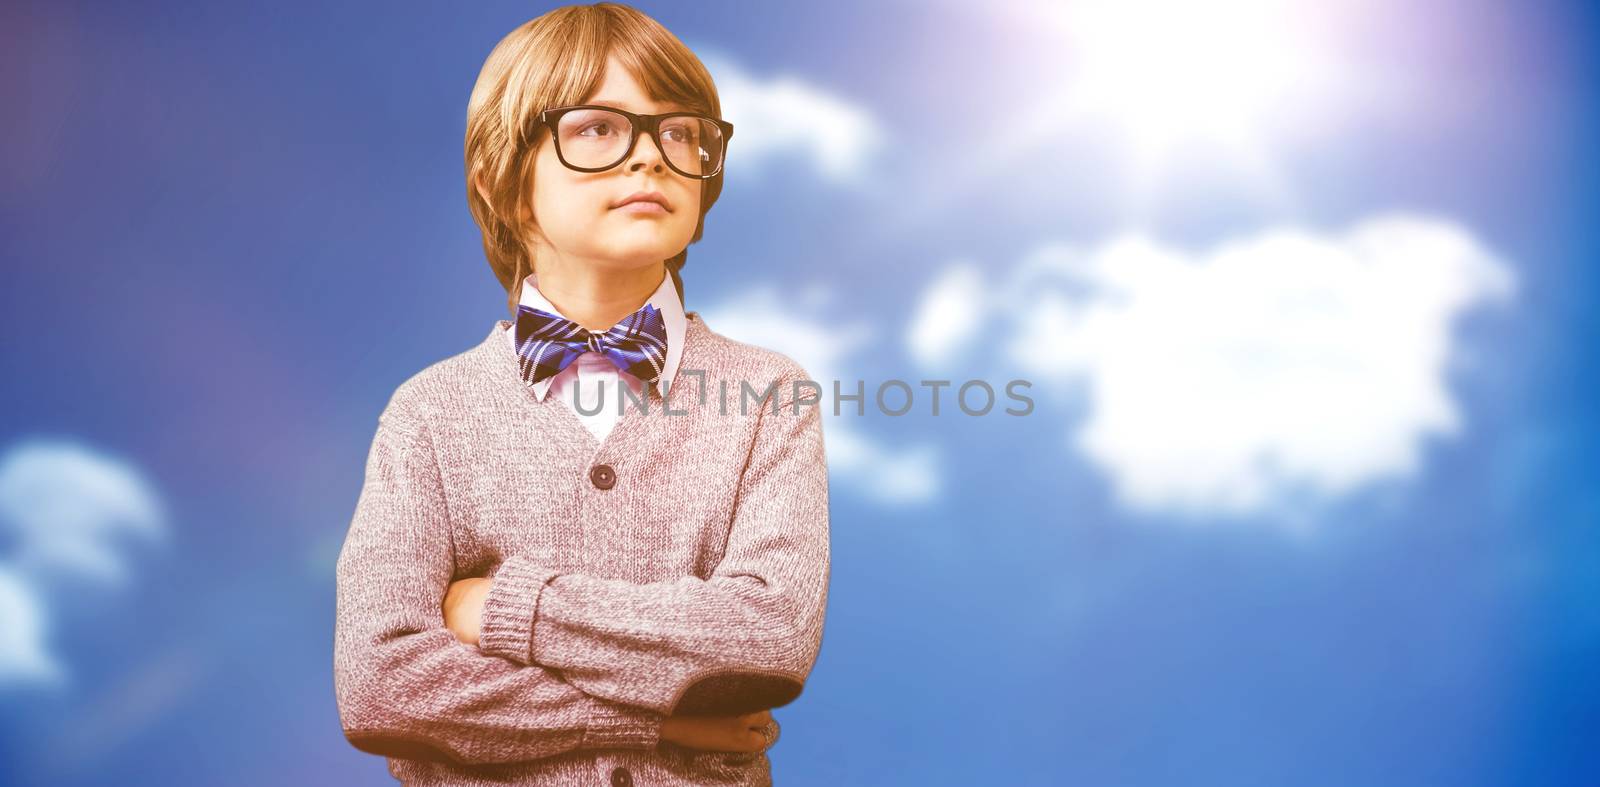 Cute pupil dressed up as teacher against bright blue sky with clouds